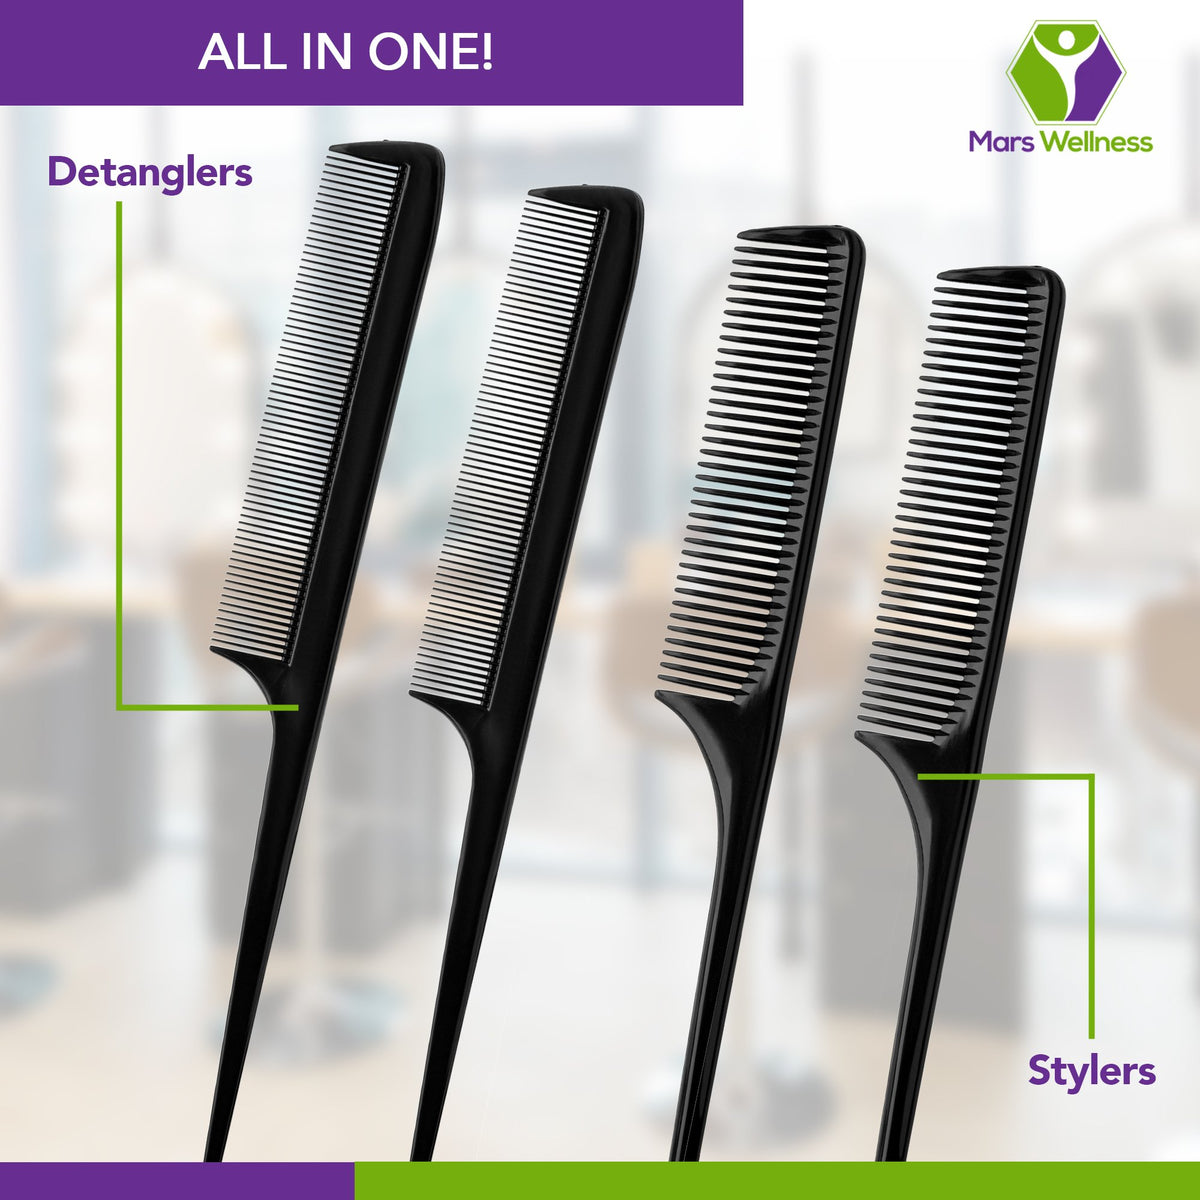 Mars Wellness 8.5” Rattail Comb Set (Pack Of 4) – Pack of Combs w/ 2 Wide & 2 Fine Tooth Combs for Women & Men – Detangling, Styling & Parting Comb Set - Hair Comb for Salon, Barbershops, Home- USA Made